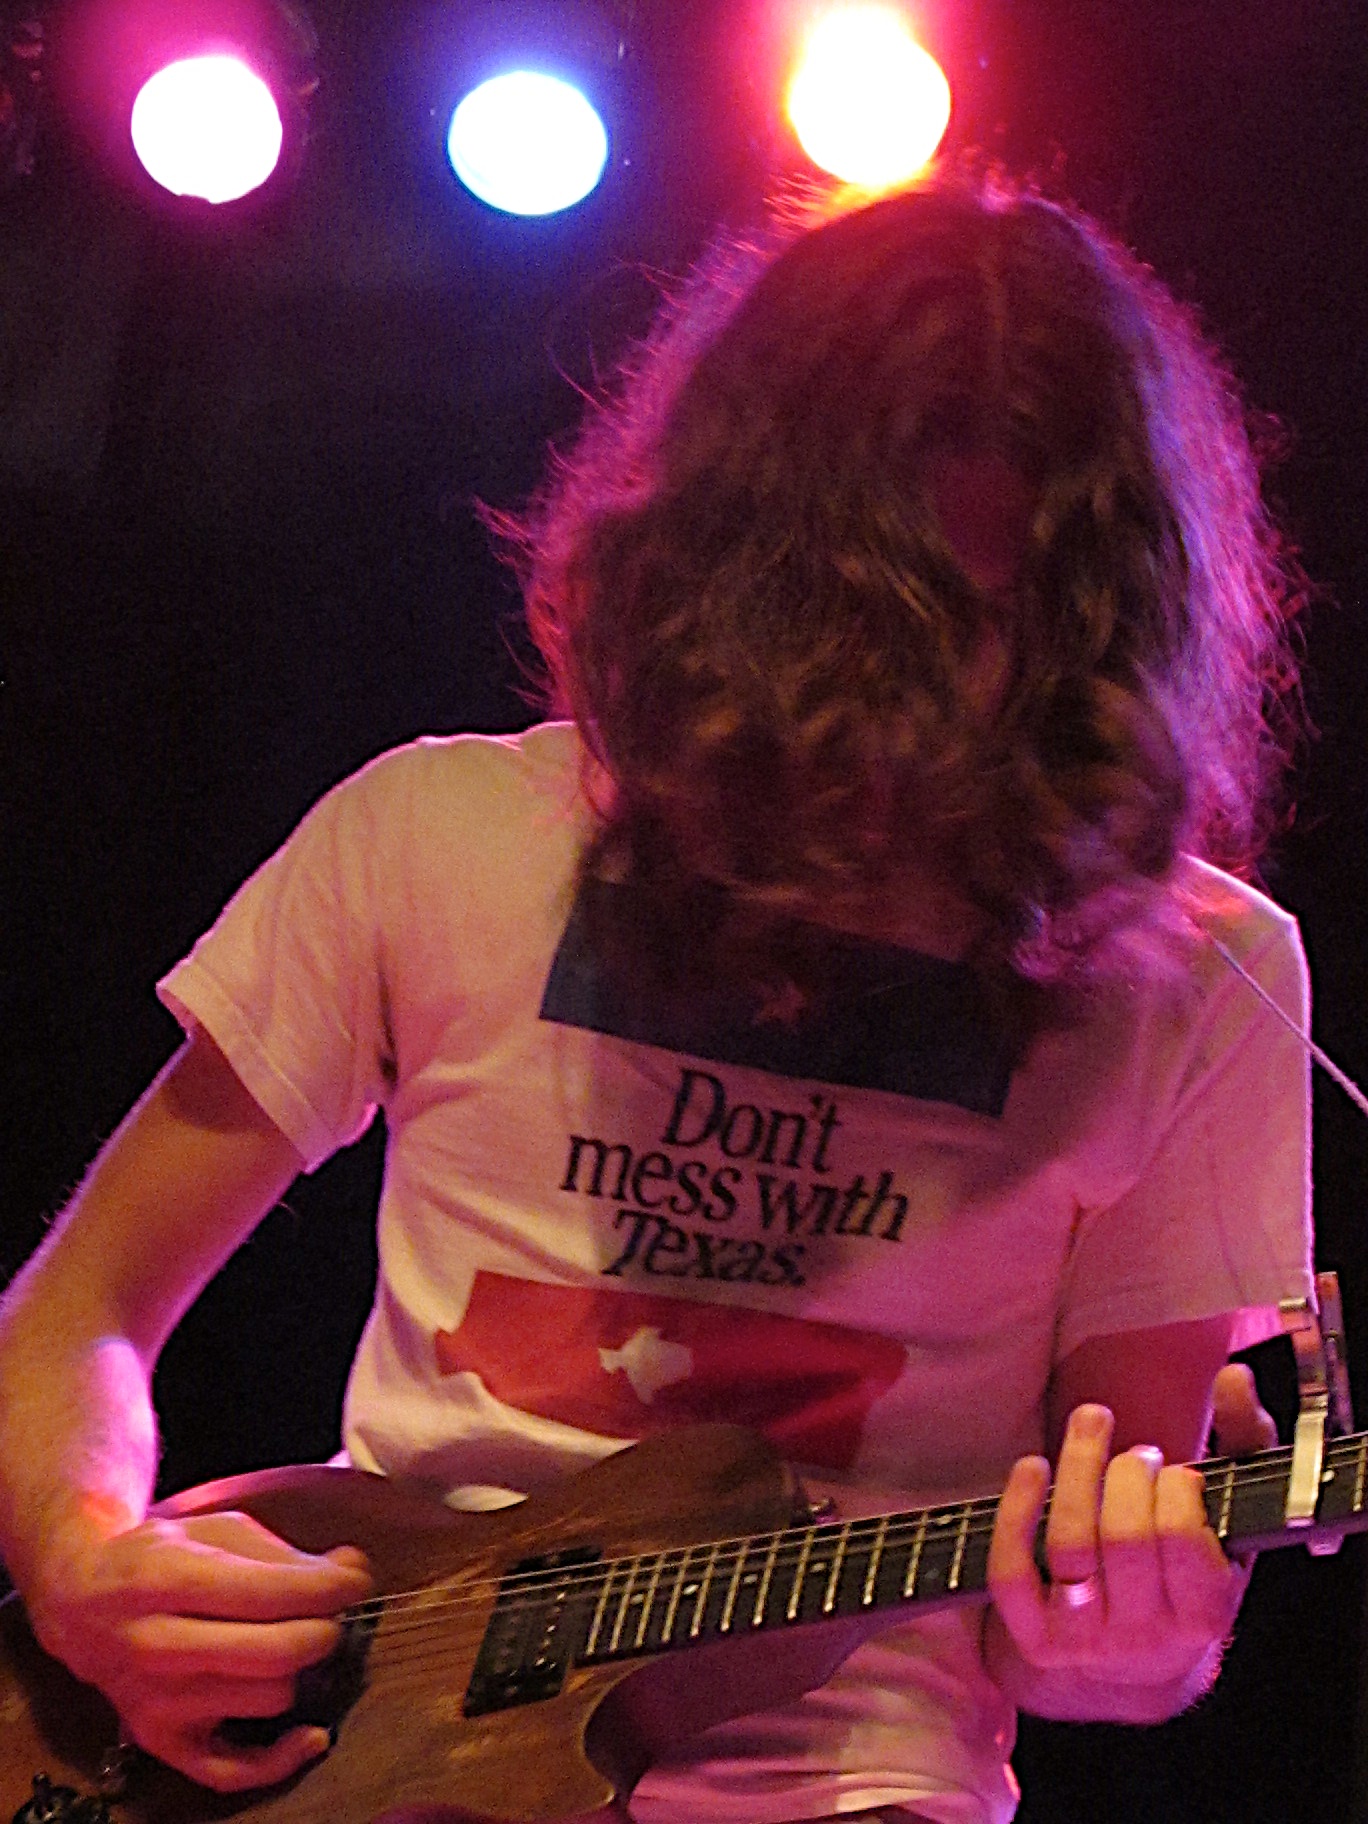 a young man plays a guitar at the end of a concert